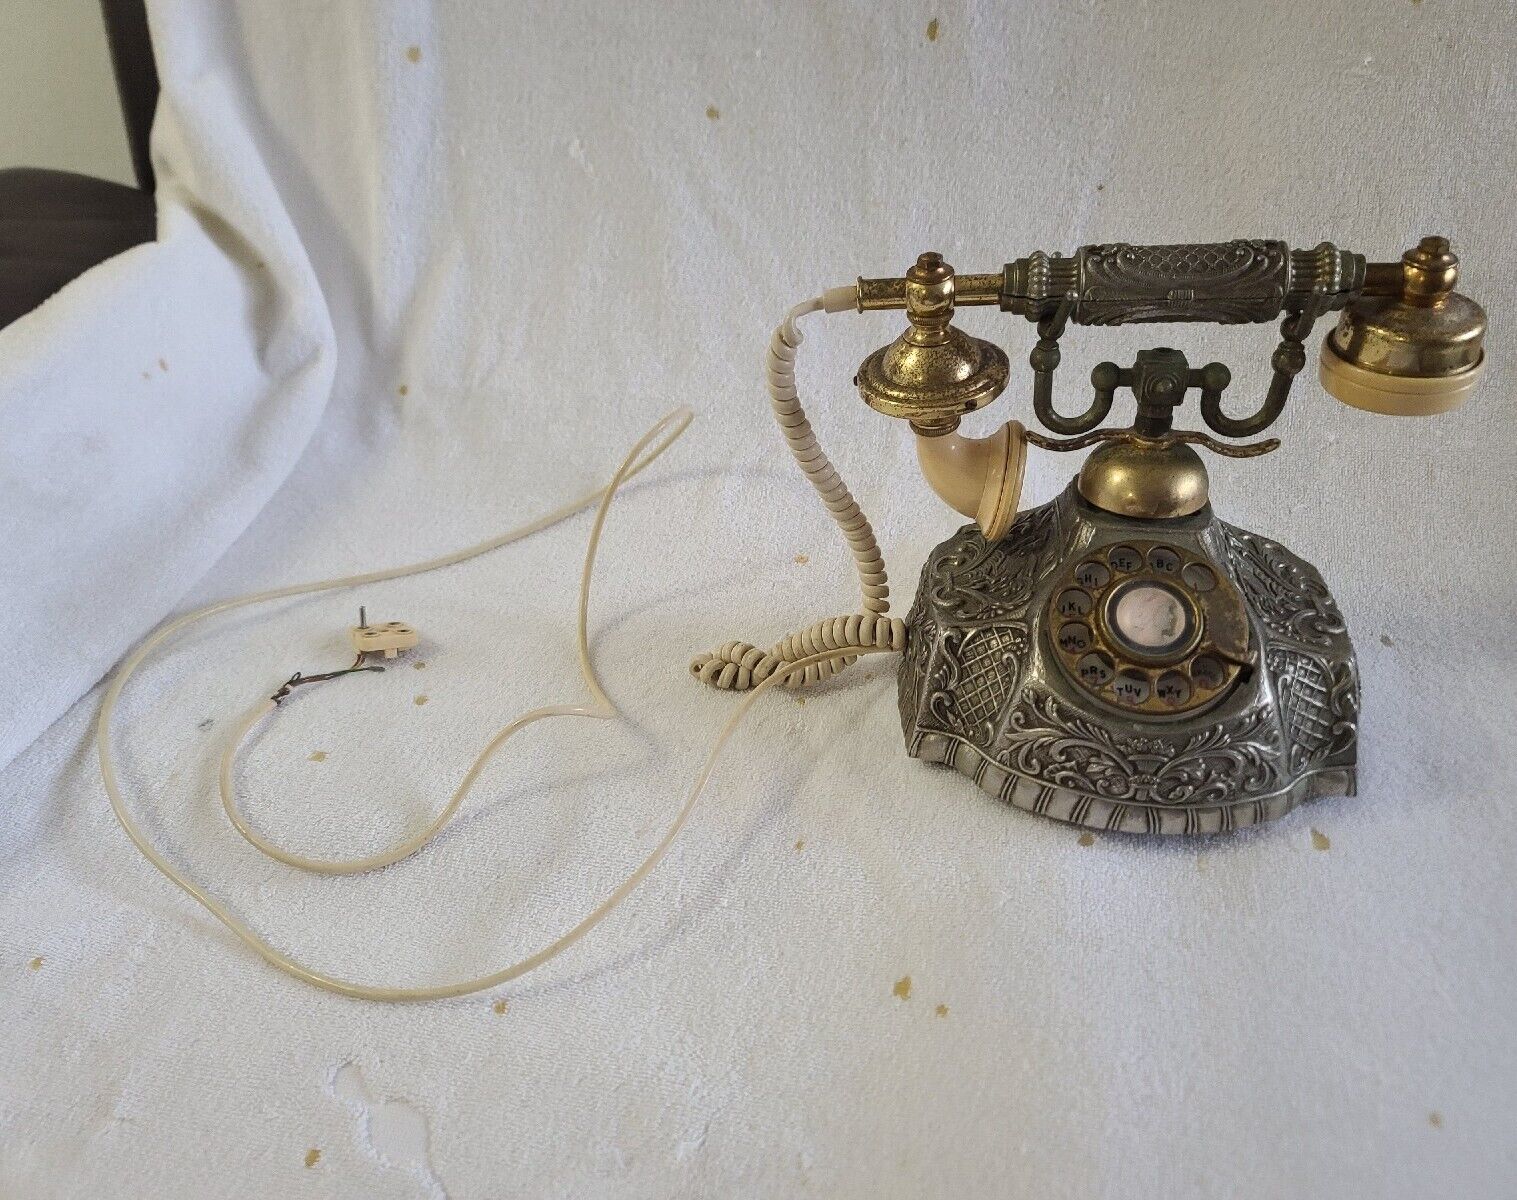 Vintage Handset Rotary Dial Phone Antique Old Fashioned Telephone (Pre-Owned) 